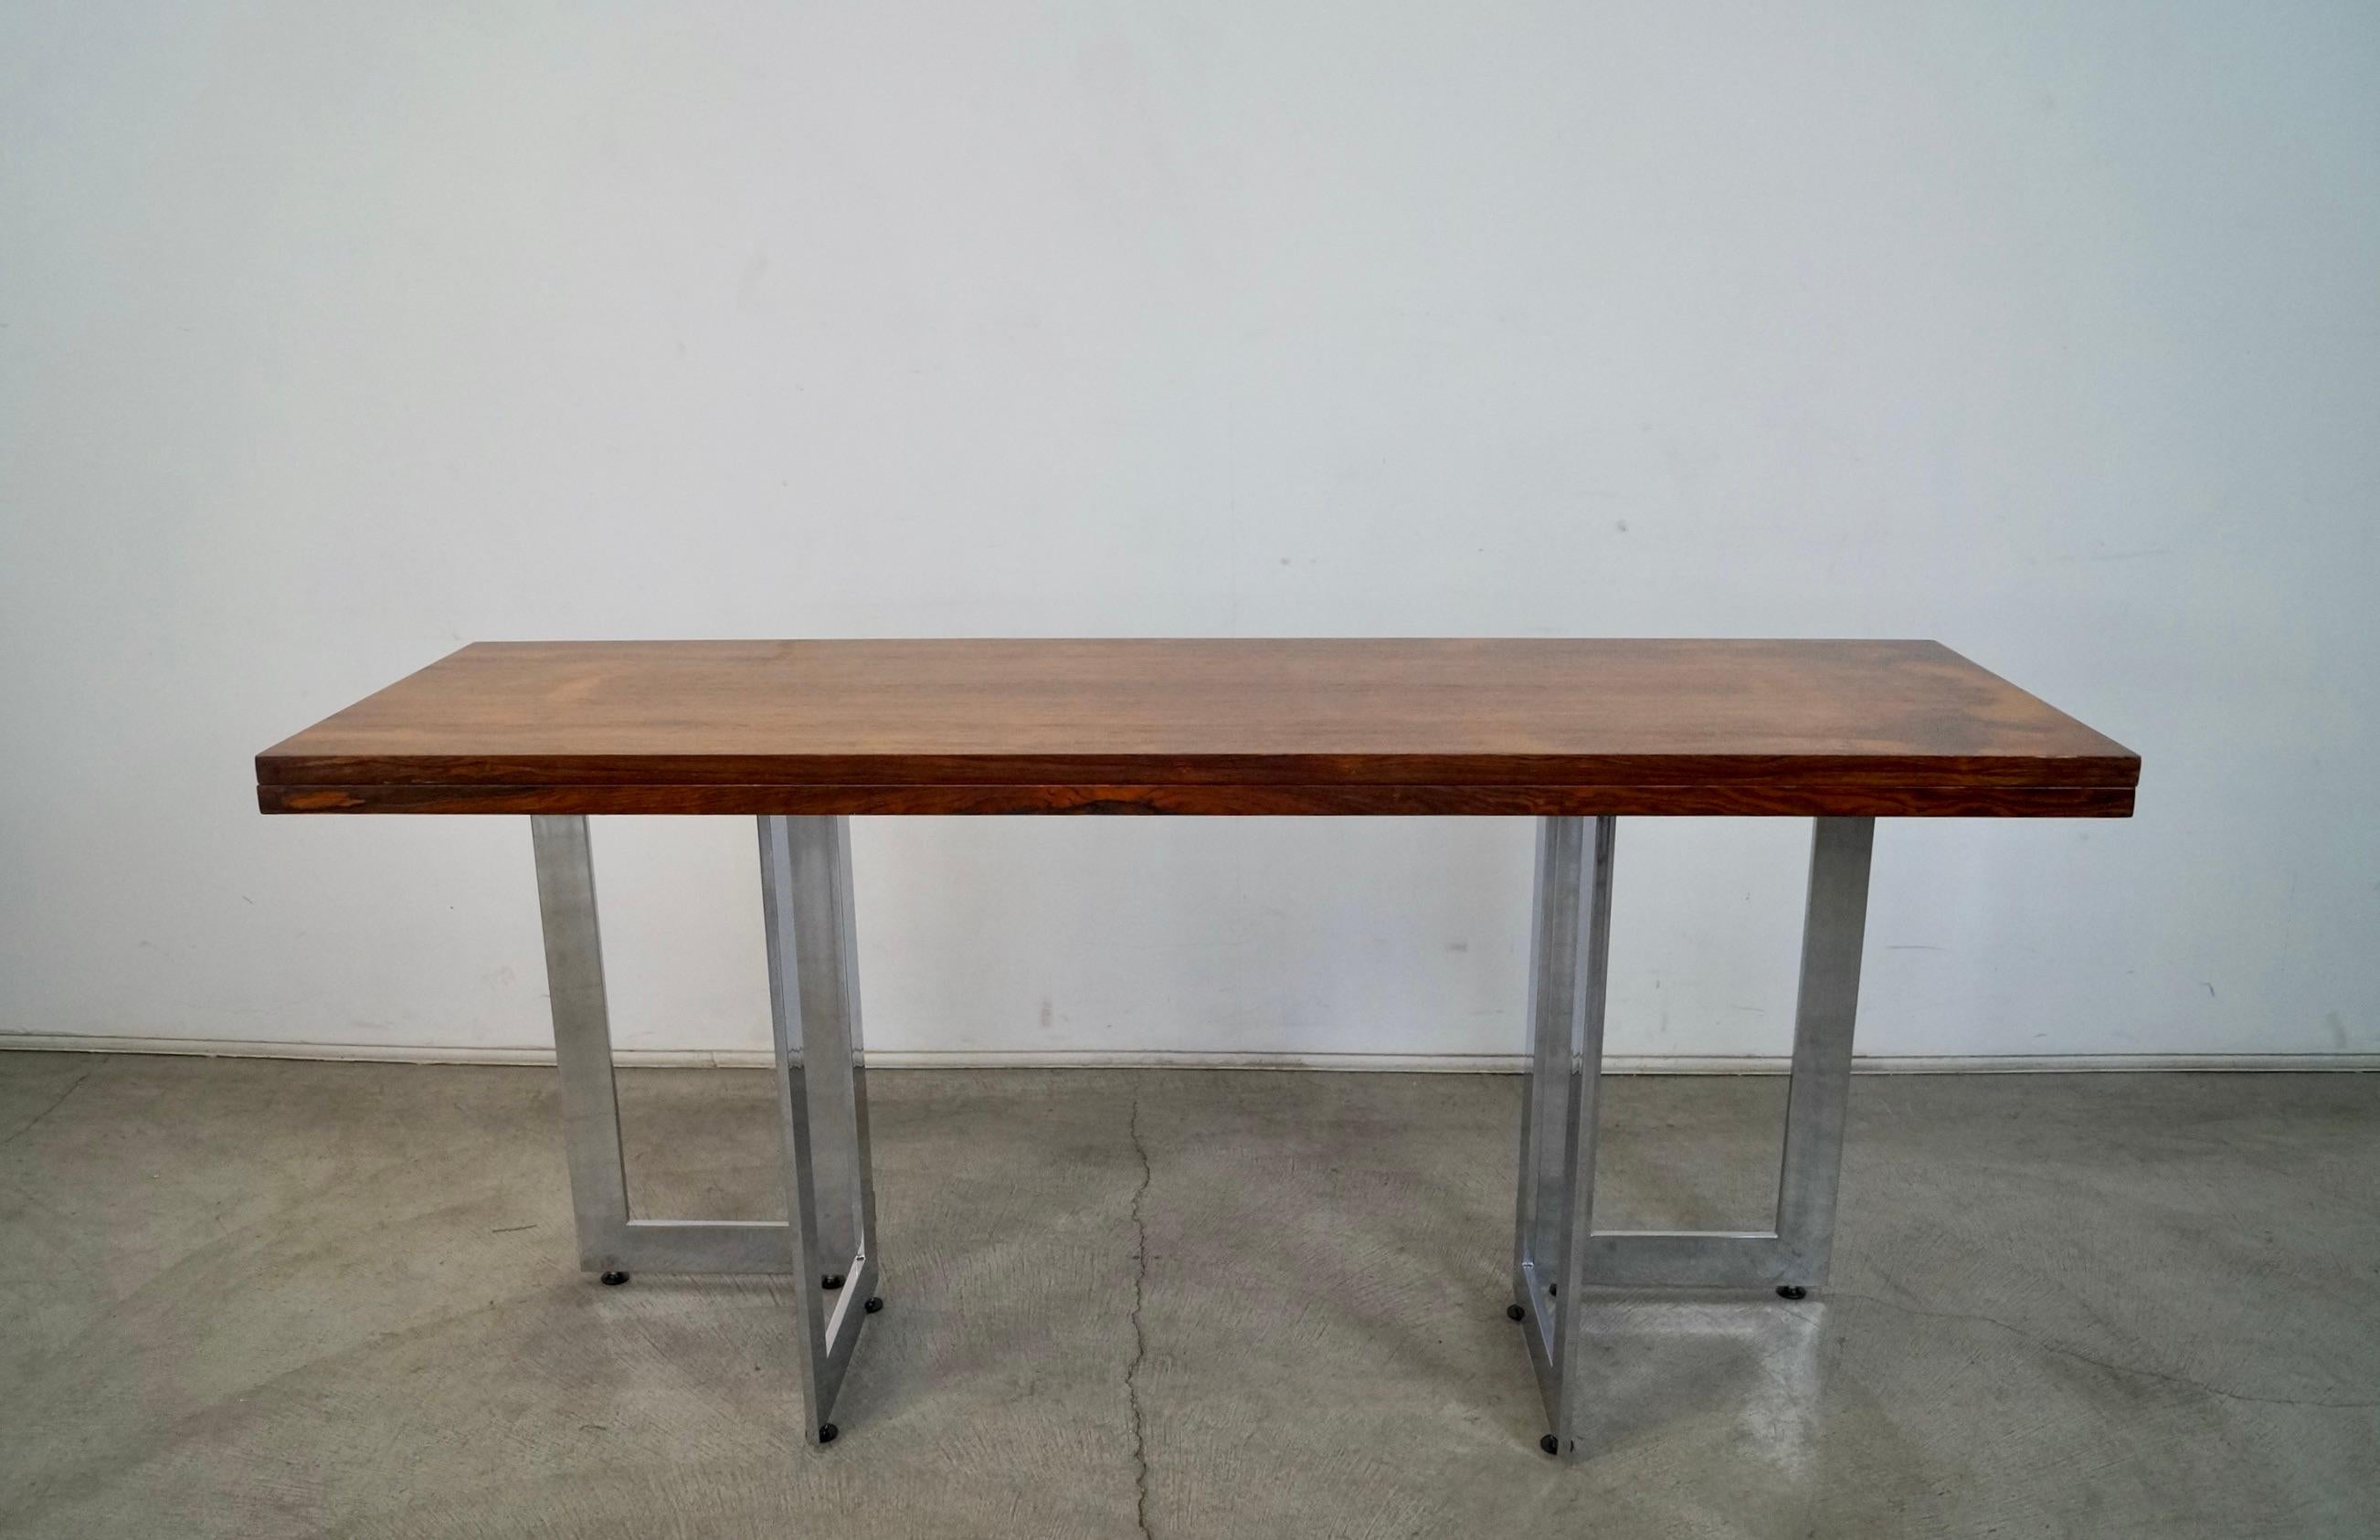 Vintage 1970's Midcentury Modern extendable table for sale. Can be used as a console table, writing desk, or dining table. It has been professionally refinished, and is now immaculate. The chrome has been polished. It's made of rosewood with a